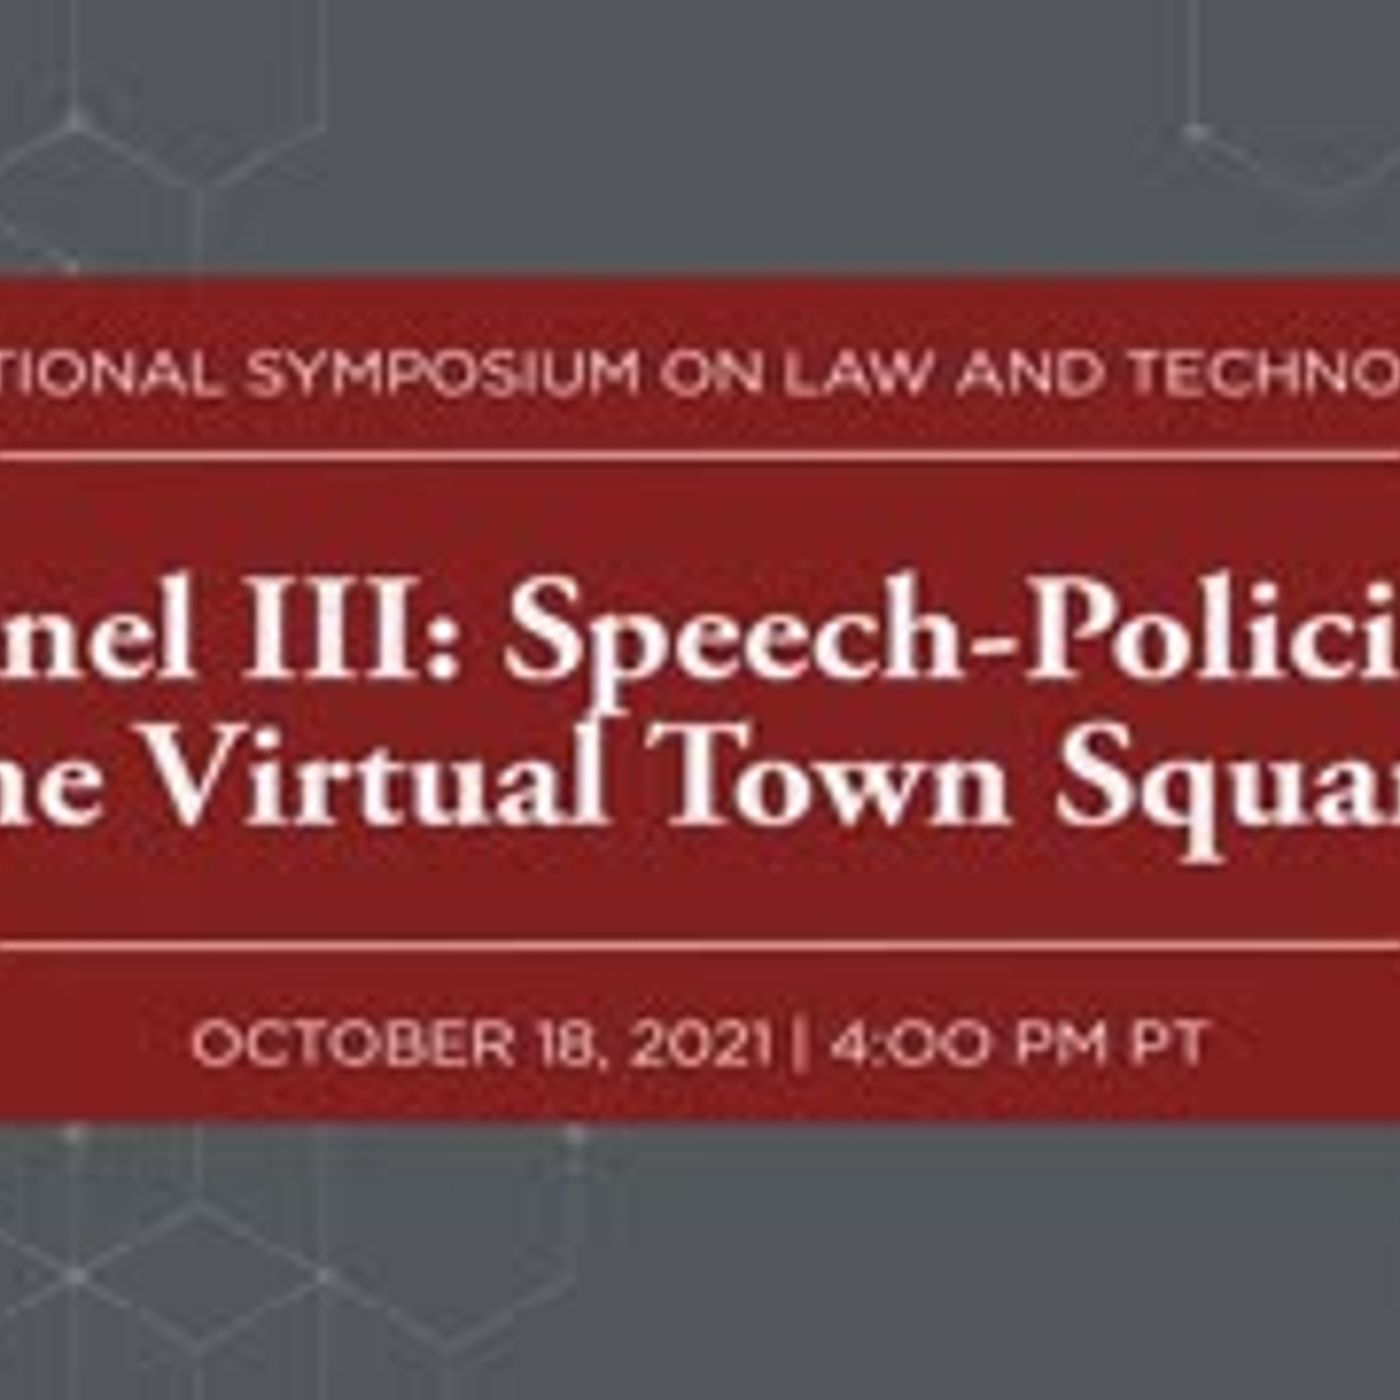 Panel III: Speech-Policing the Virtual Town Square